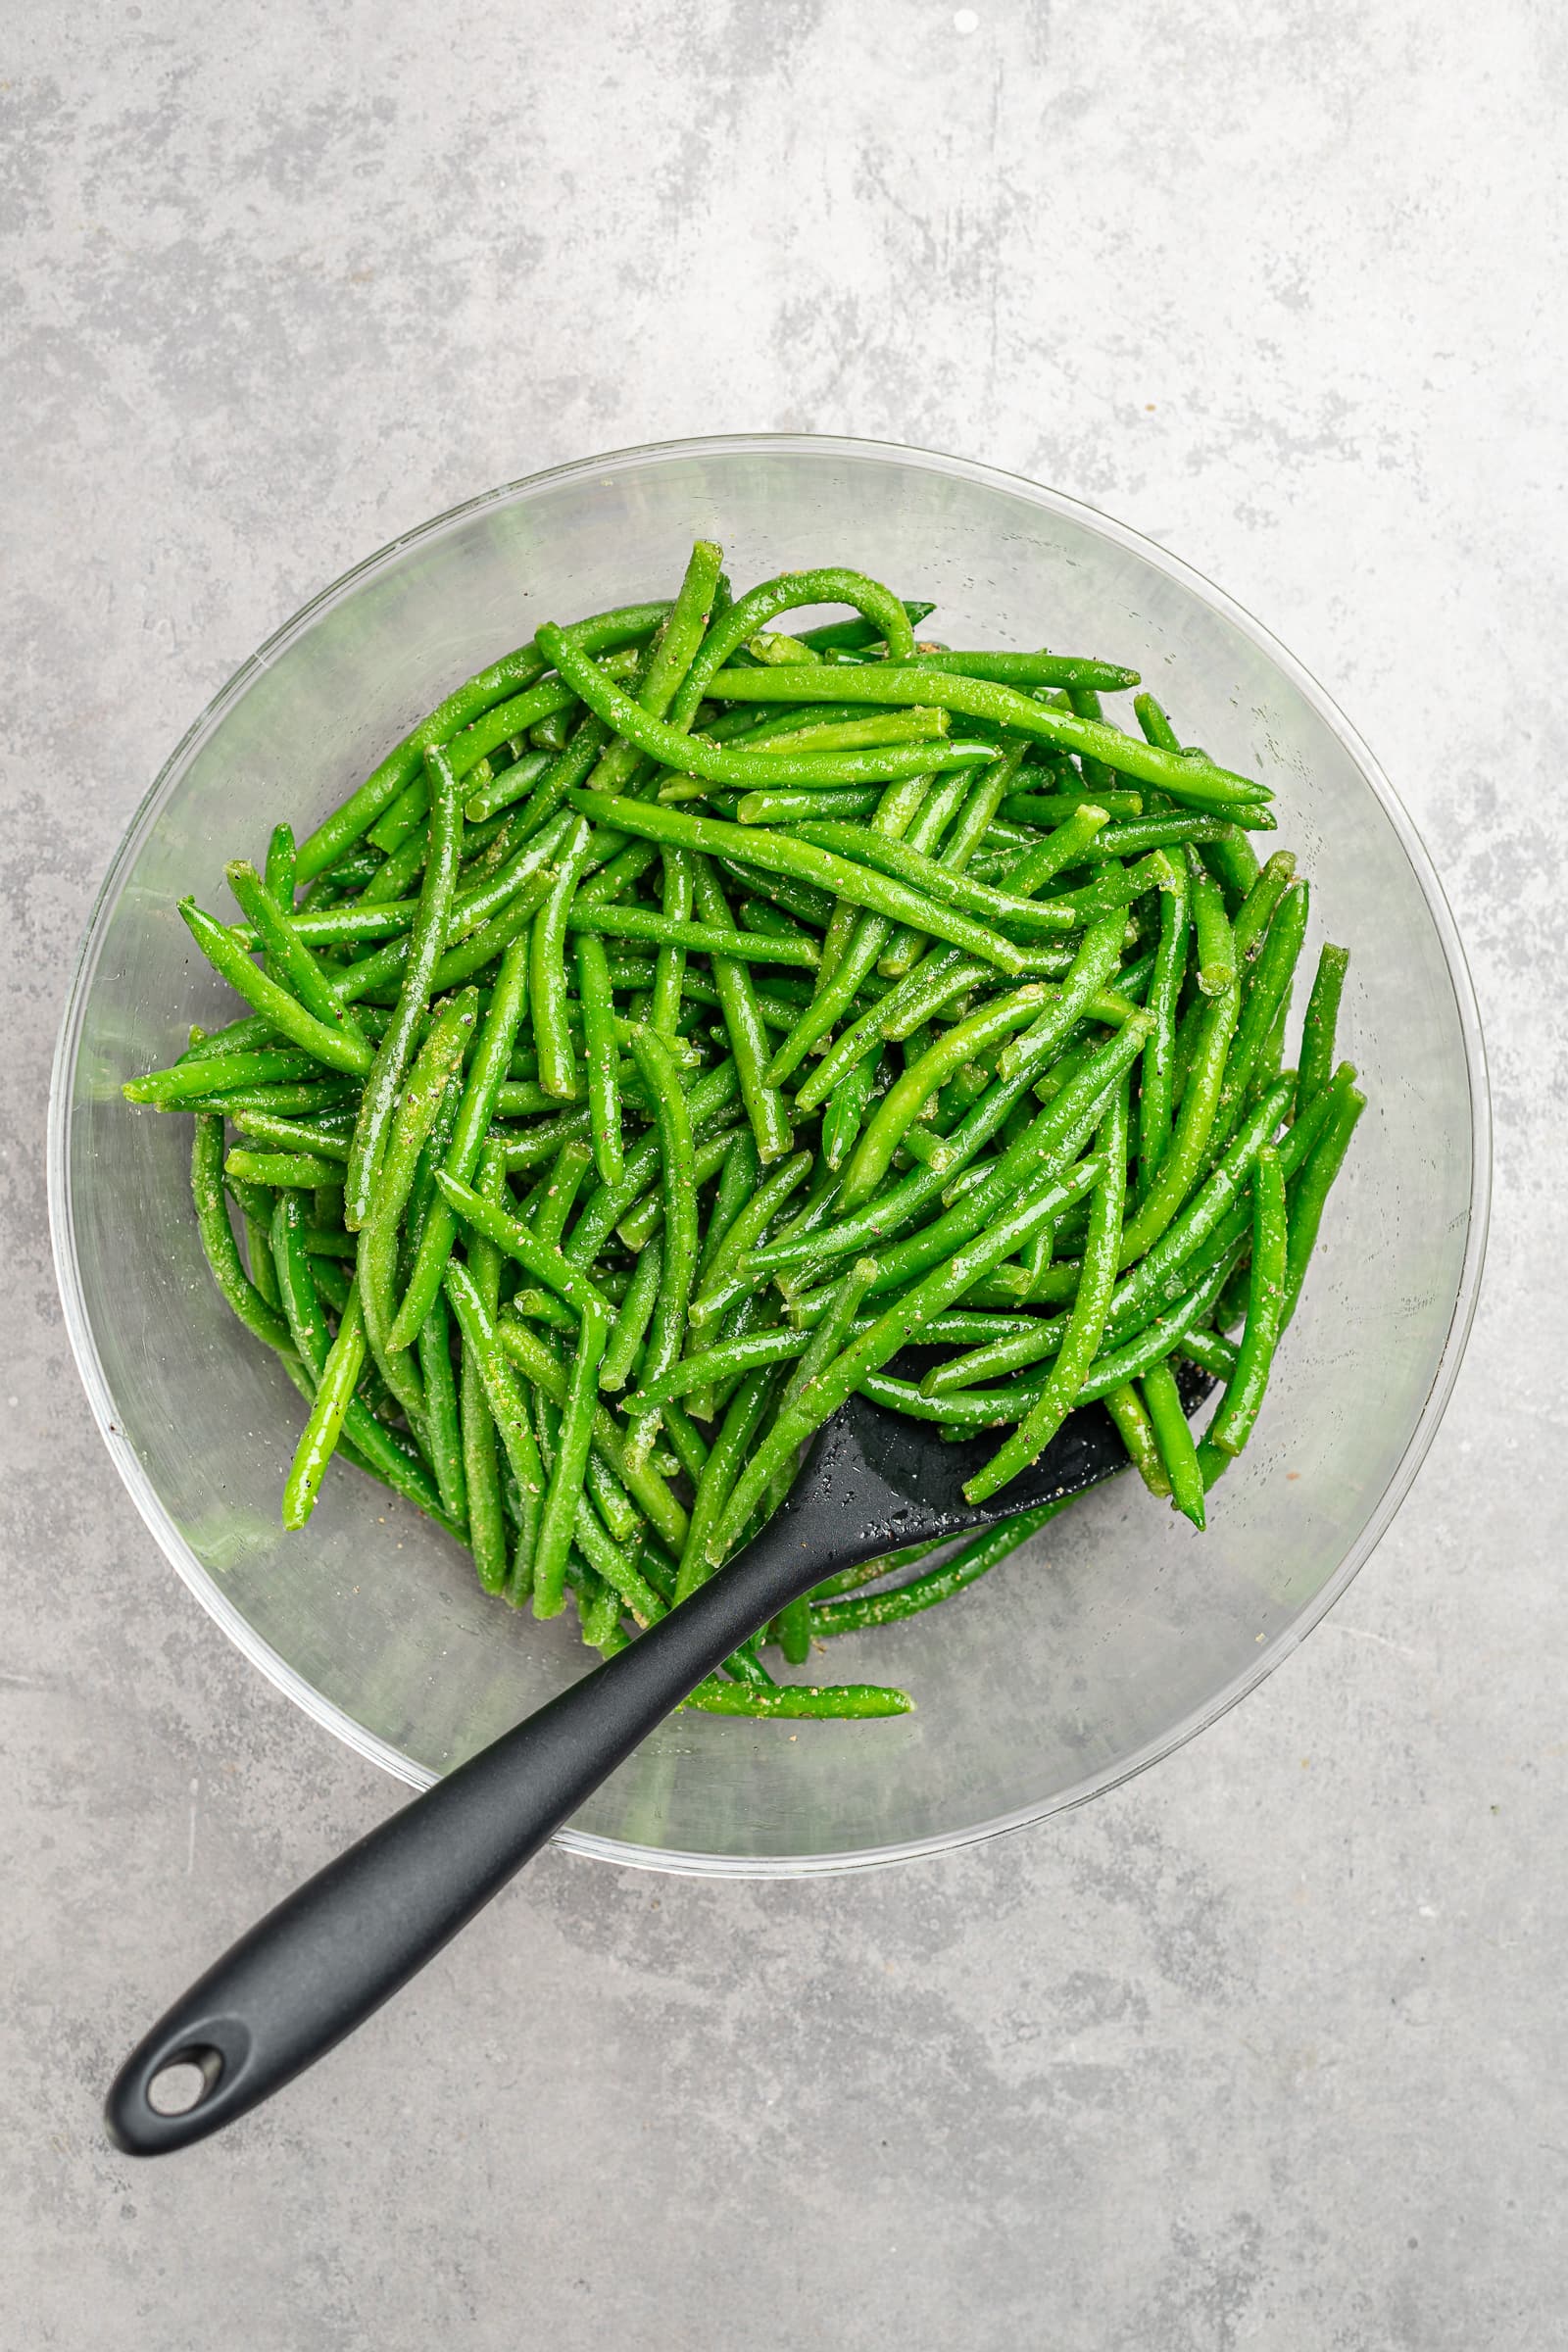 Frozen green beans in a large bowl tossed in seasonings.